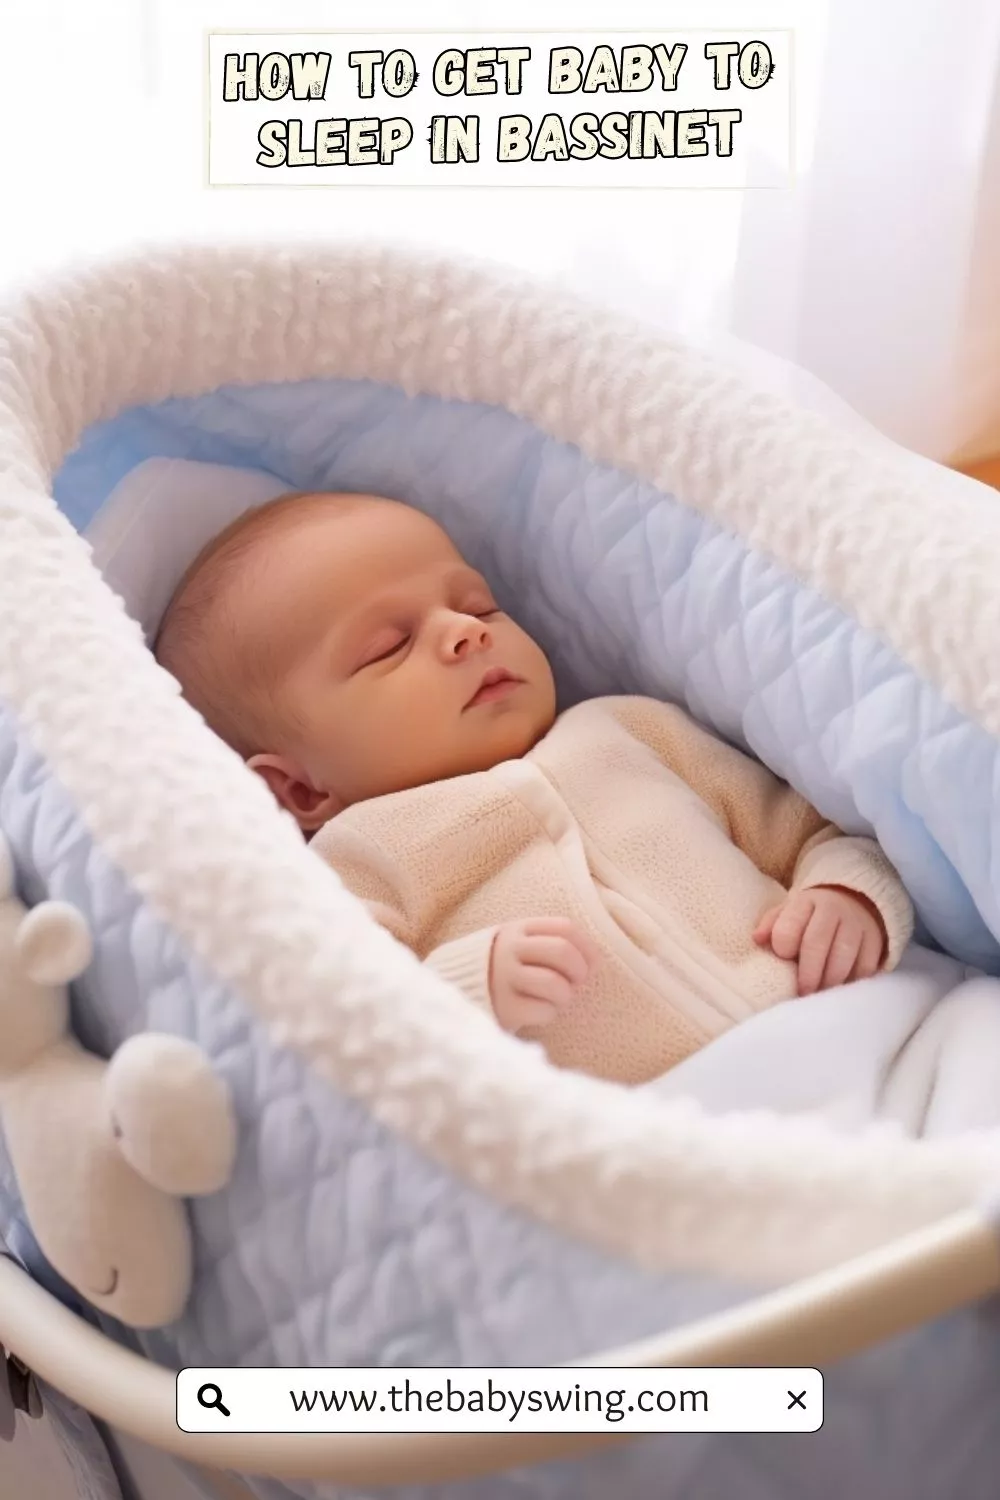 How to get baby to sleep in bassinet